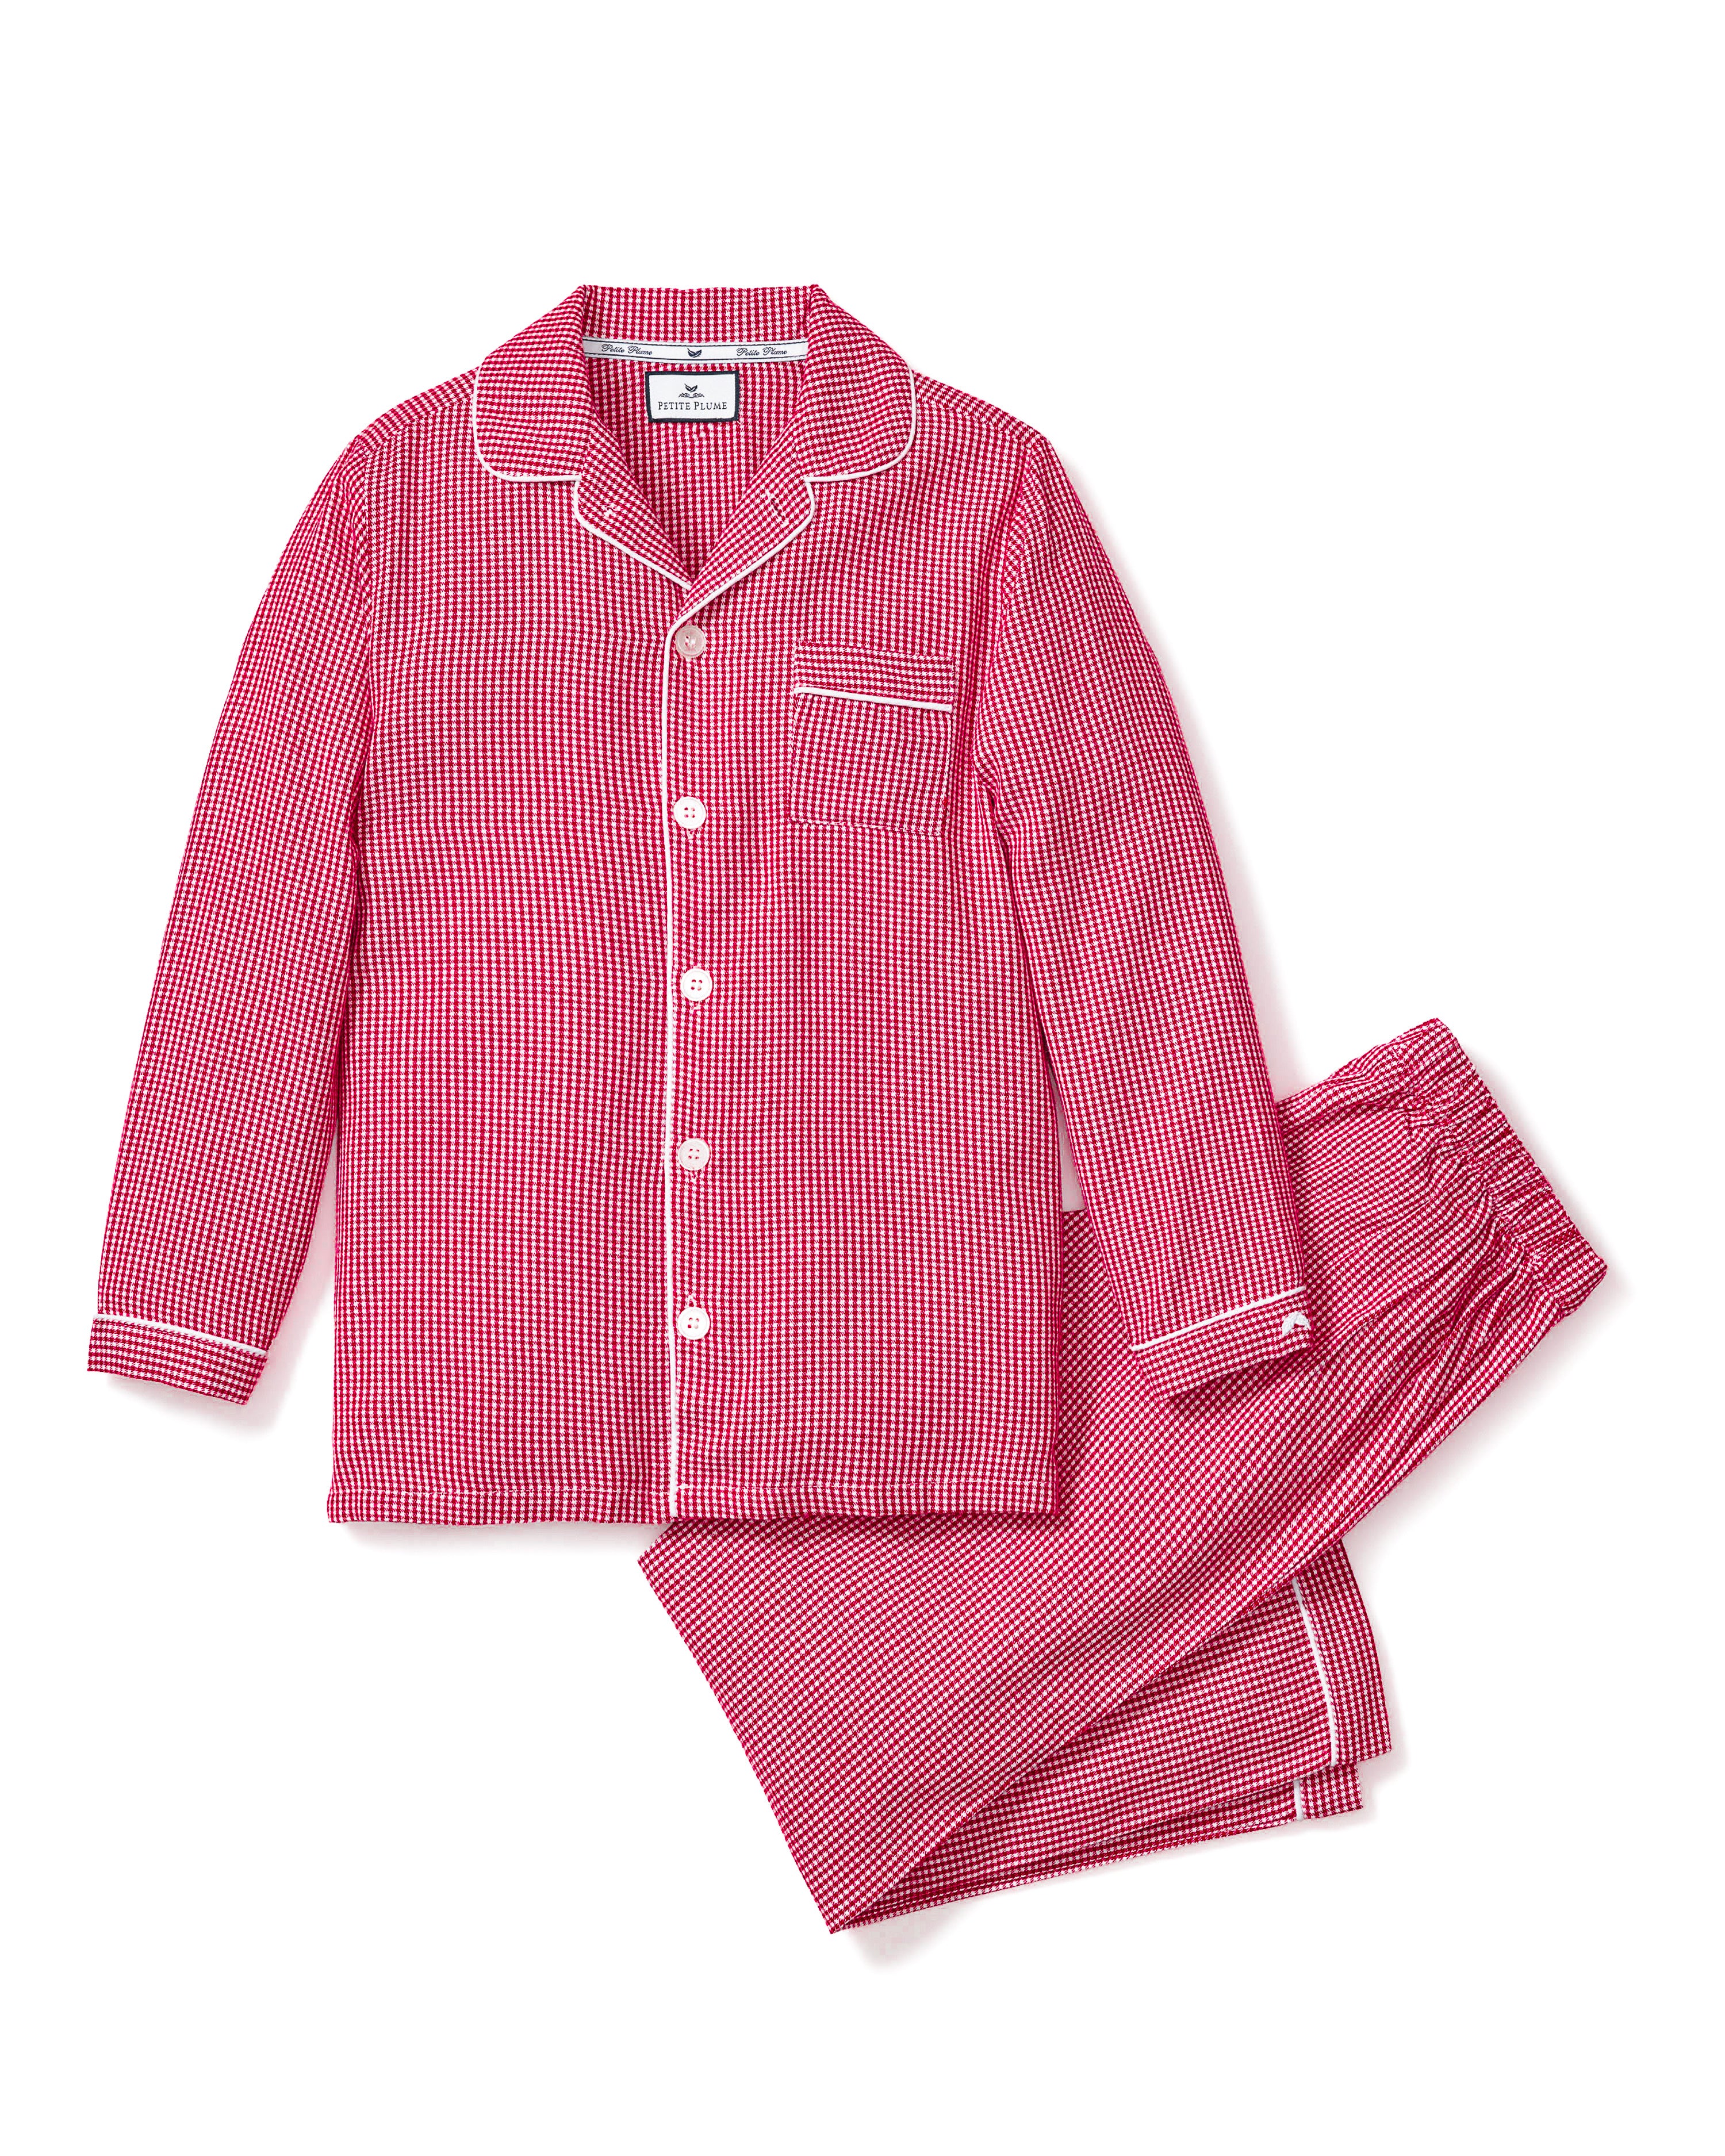 Kid's Flannel Pajama Set in Red Mini Gingham